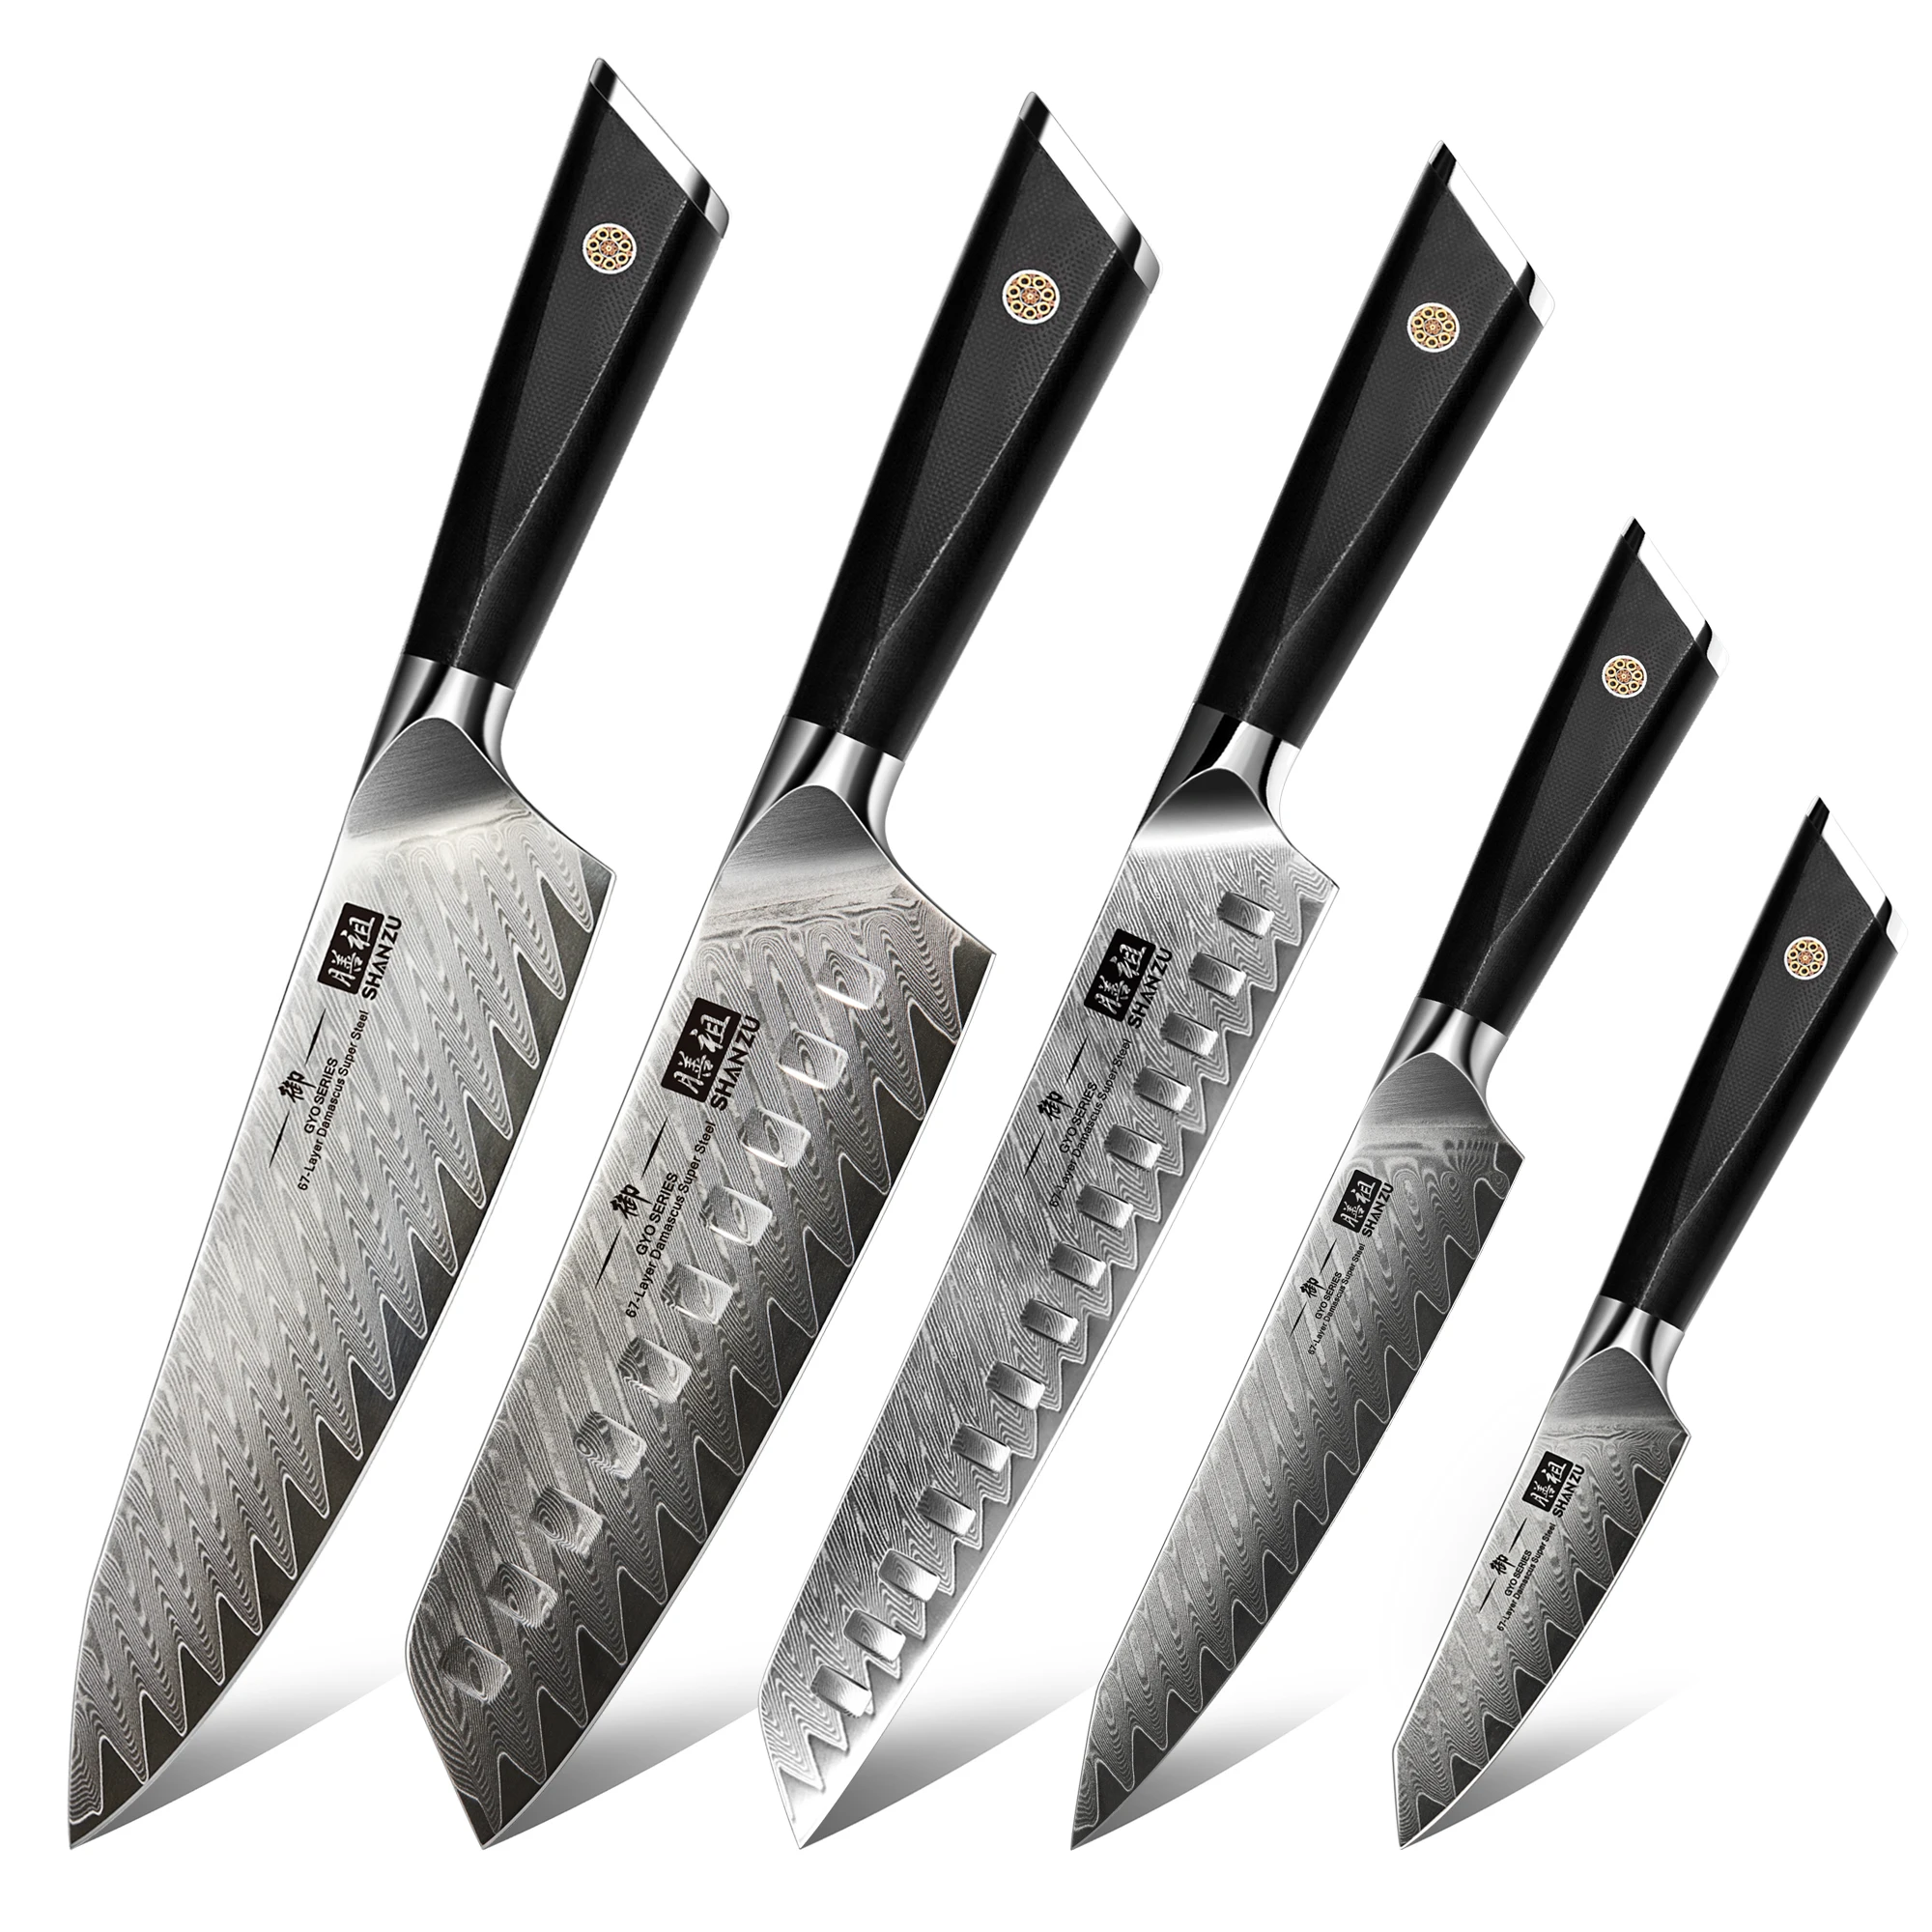 Shan Zu Chef Knife Review - Chefs Resources